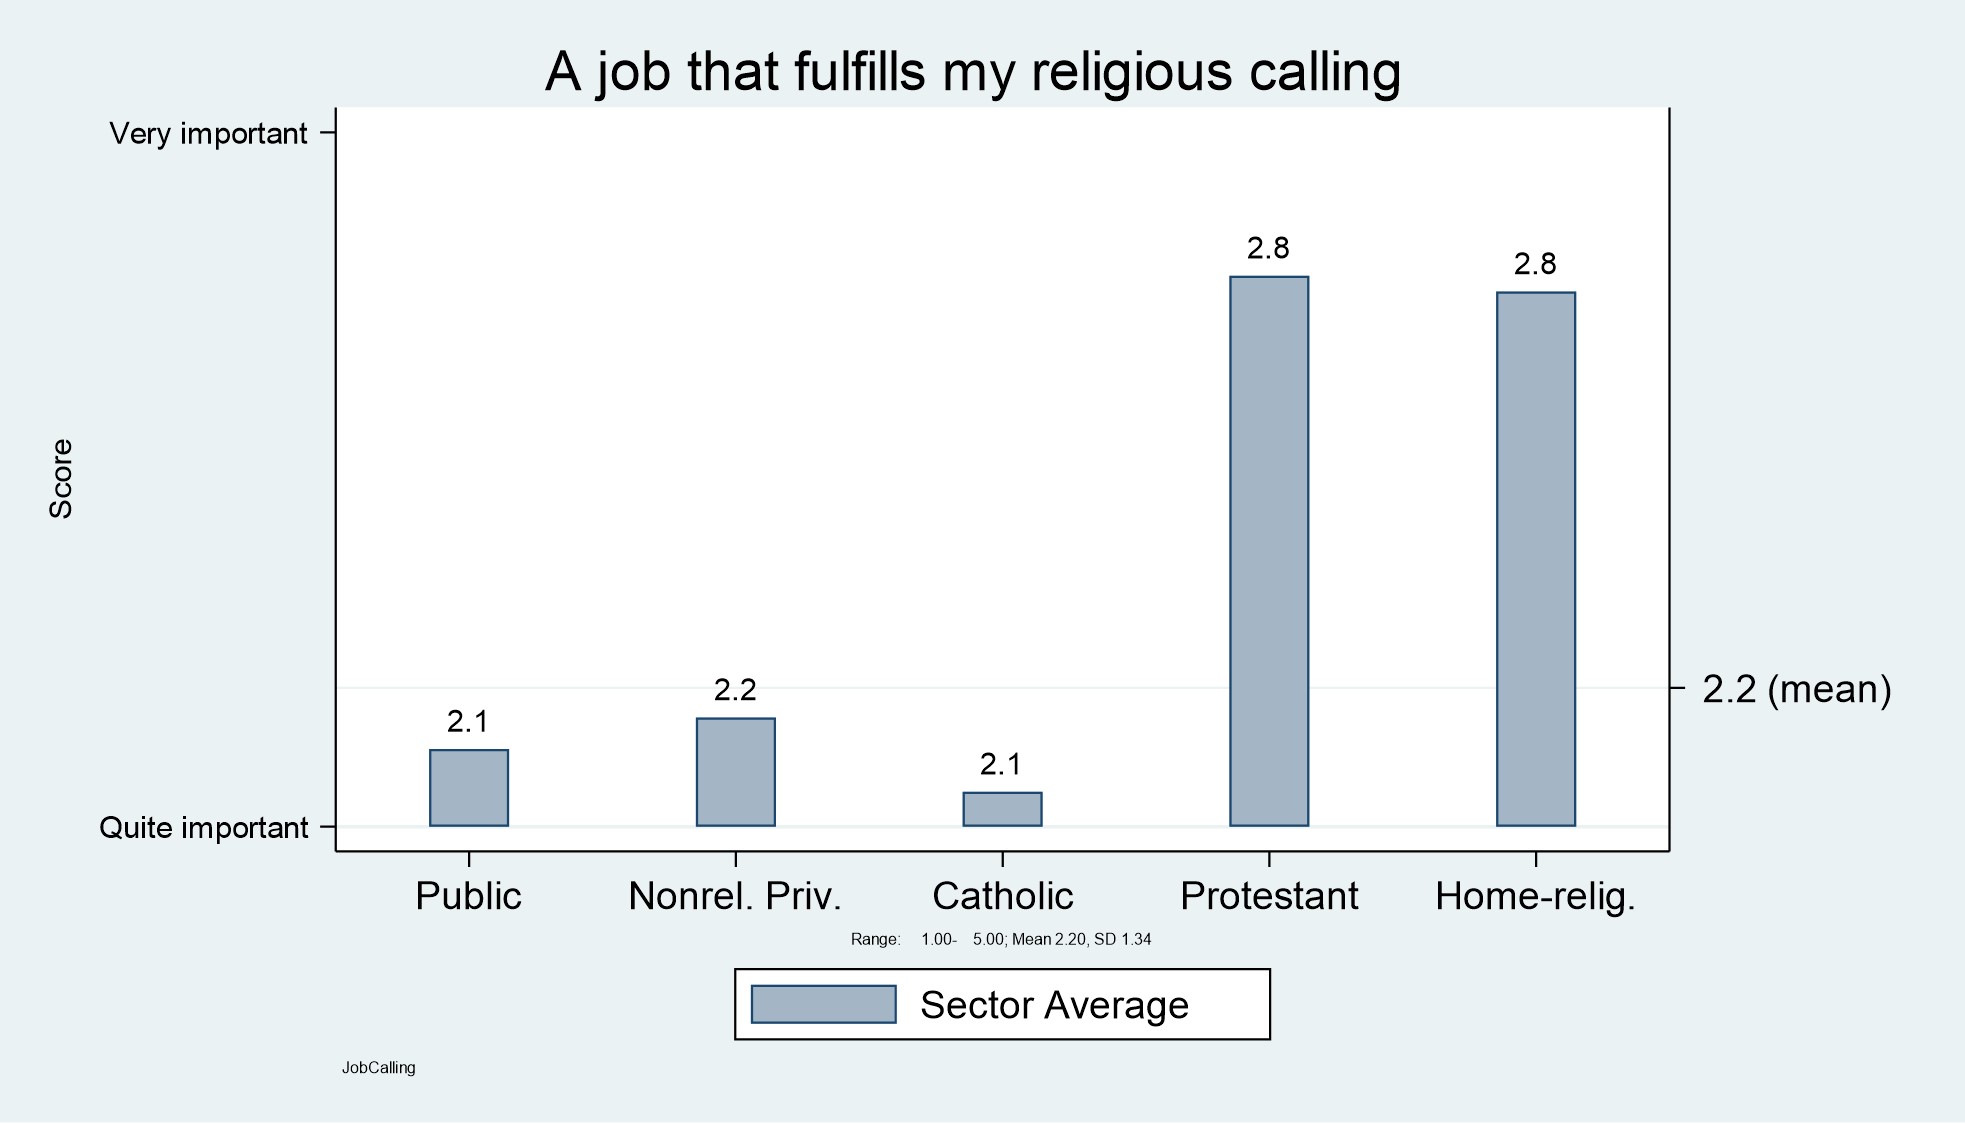 A job that fulfills my religious calling